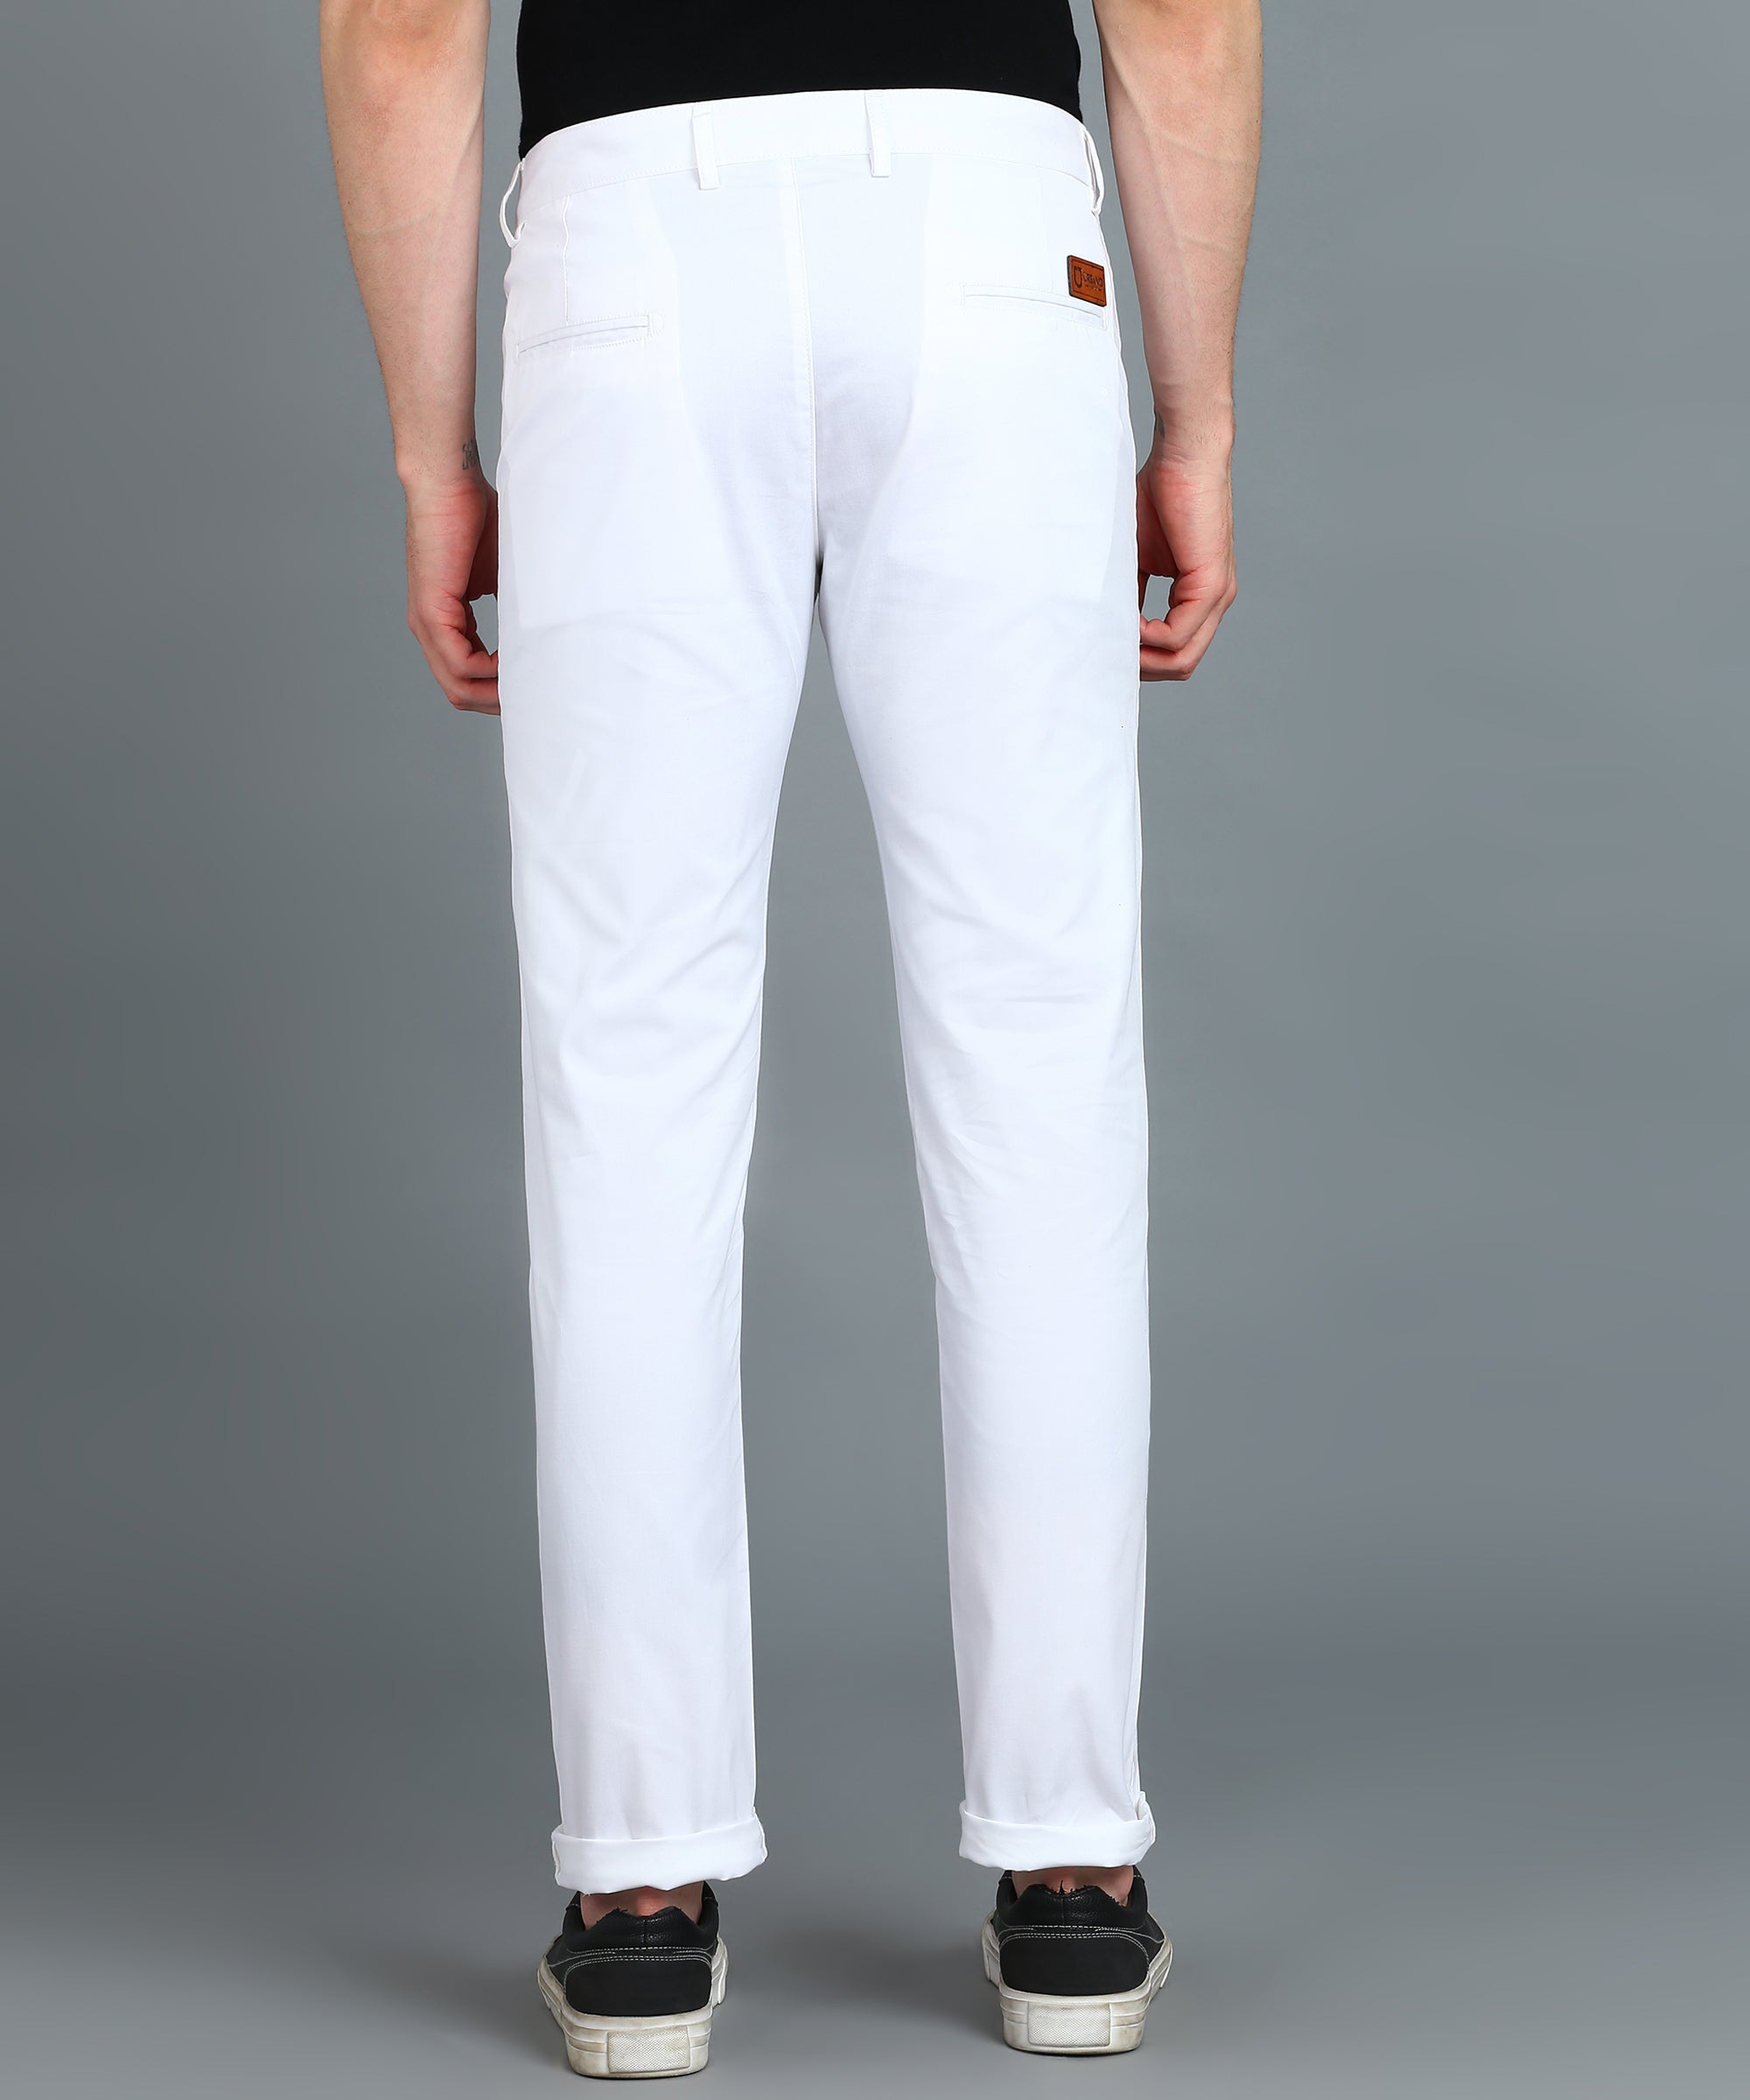 Men's White Cotton Light Weight Non-Stretch Slim Fit Casual Trousers